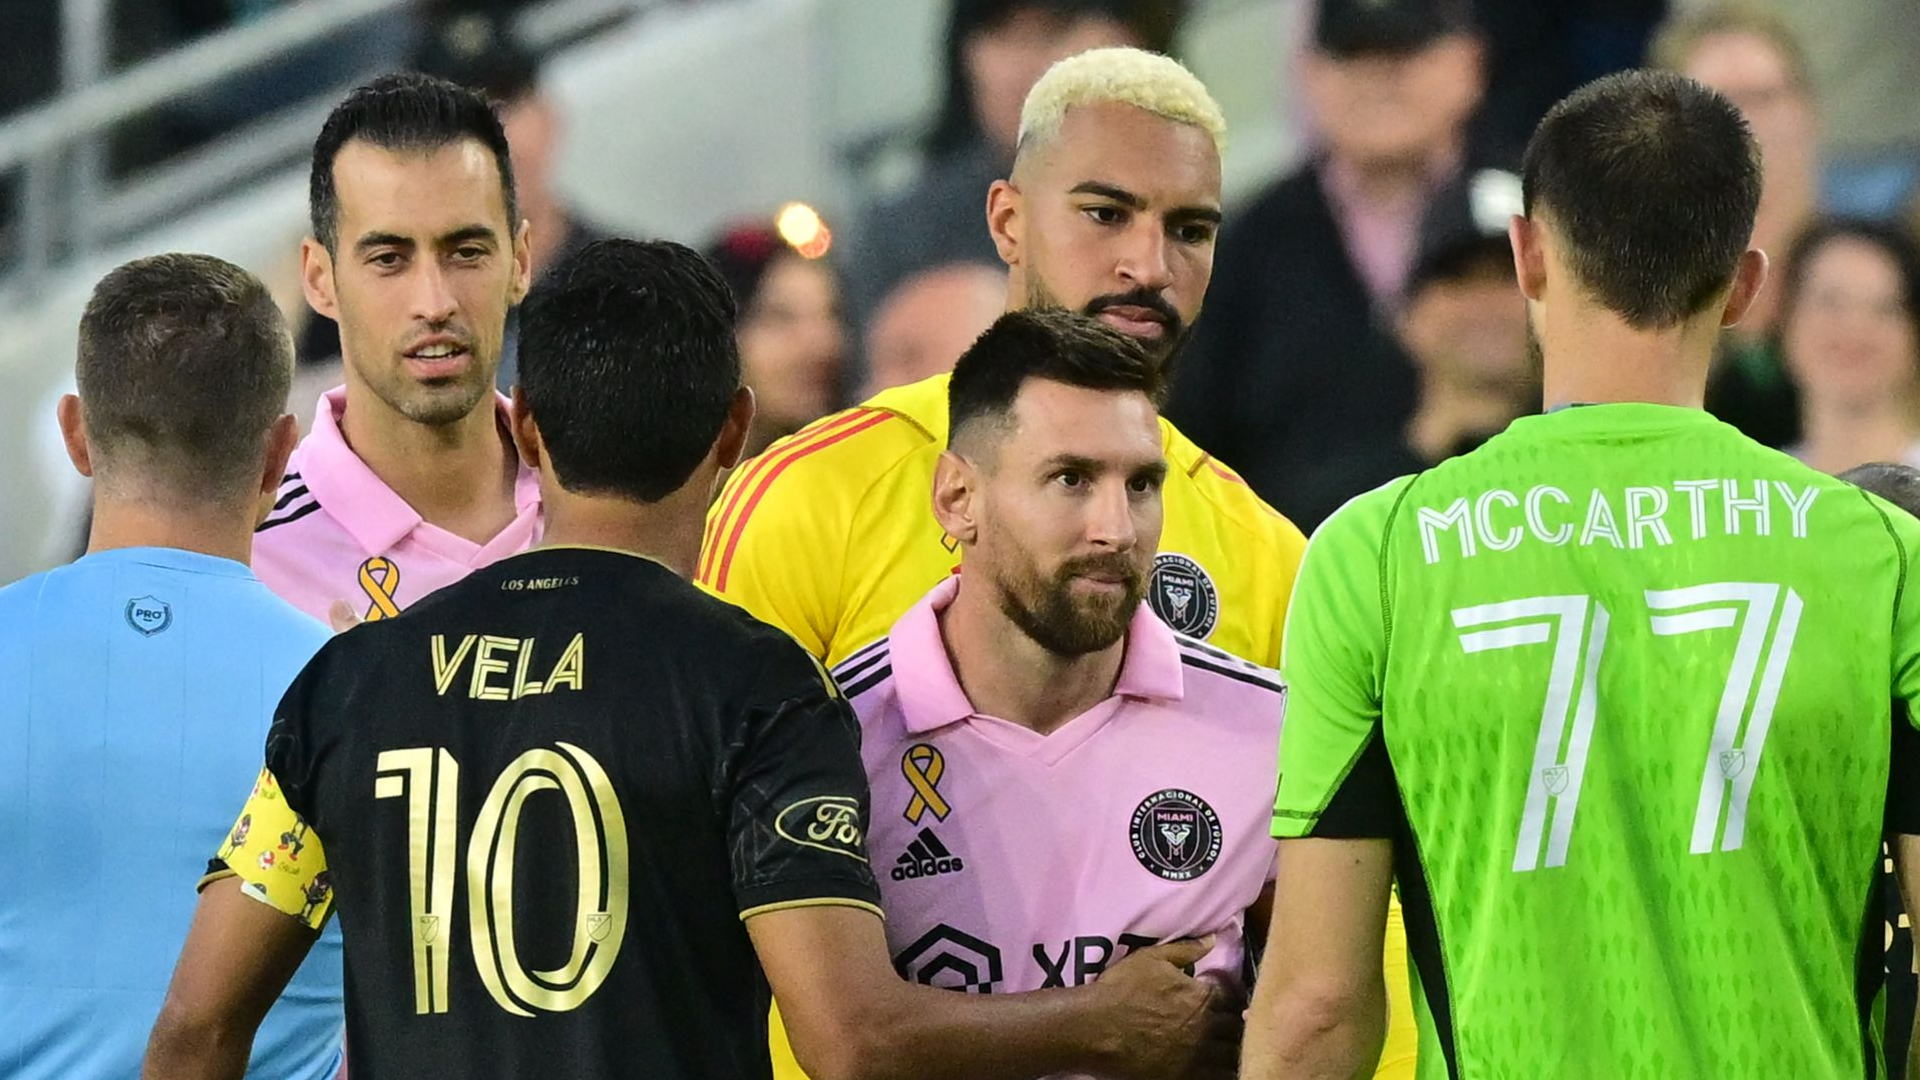 Jersey Swap With Lionel Messi Puts $537,430 Star's Career in